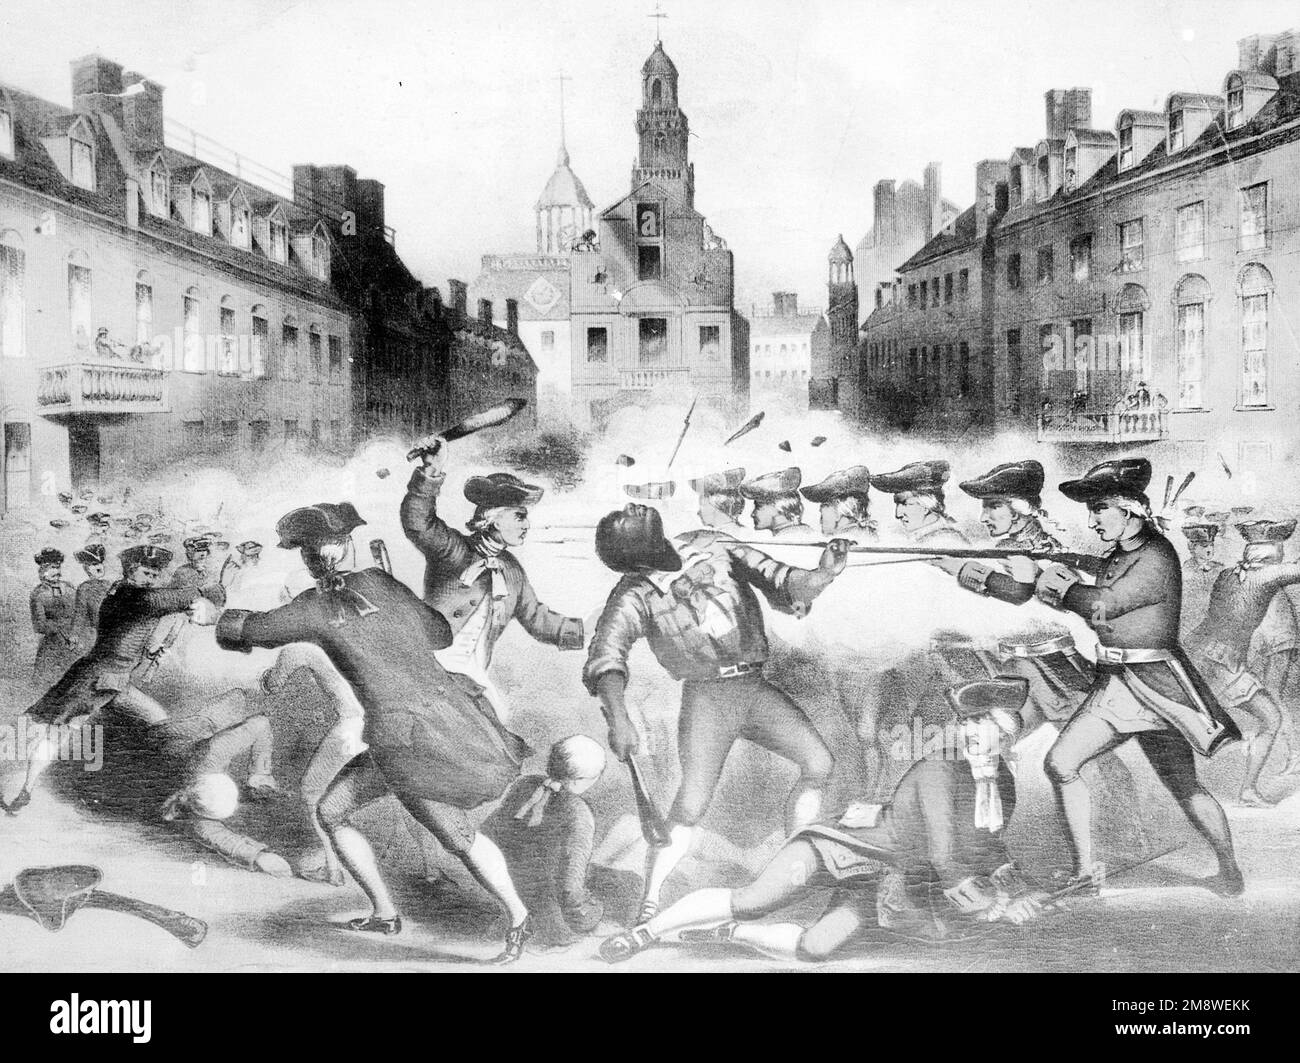 Boston Massacre, The Boston Massacre (known in Great Britain as the Incident on King Street[1]) was a confrontation in Boston on March 5, 1770, in which a group of nine British soldiers shot five people out of a crowd of three or four hundred who were harassing them verbally and throwing various projectiles. The event was heavily publicized as 'a massacre' by leading Patriots such as Paul Revere and Samuel Adams.[2][3][4] British troops had been stationed in the Province of Massachusetts Bay since 1768 in order to support cr Stock Photo